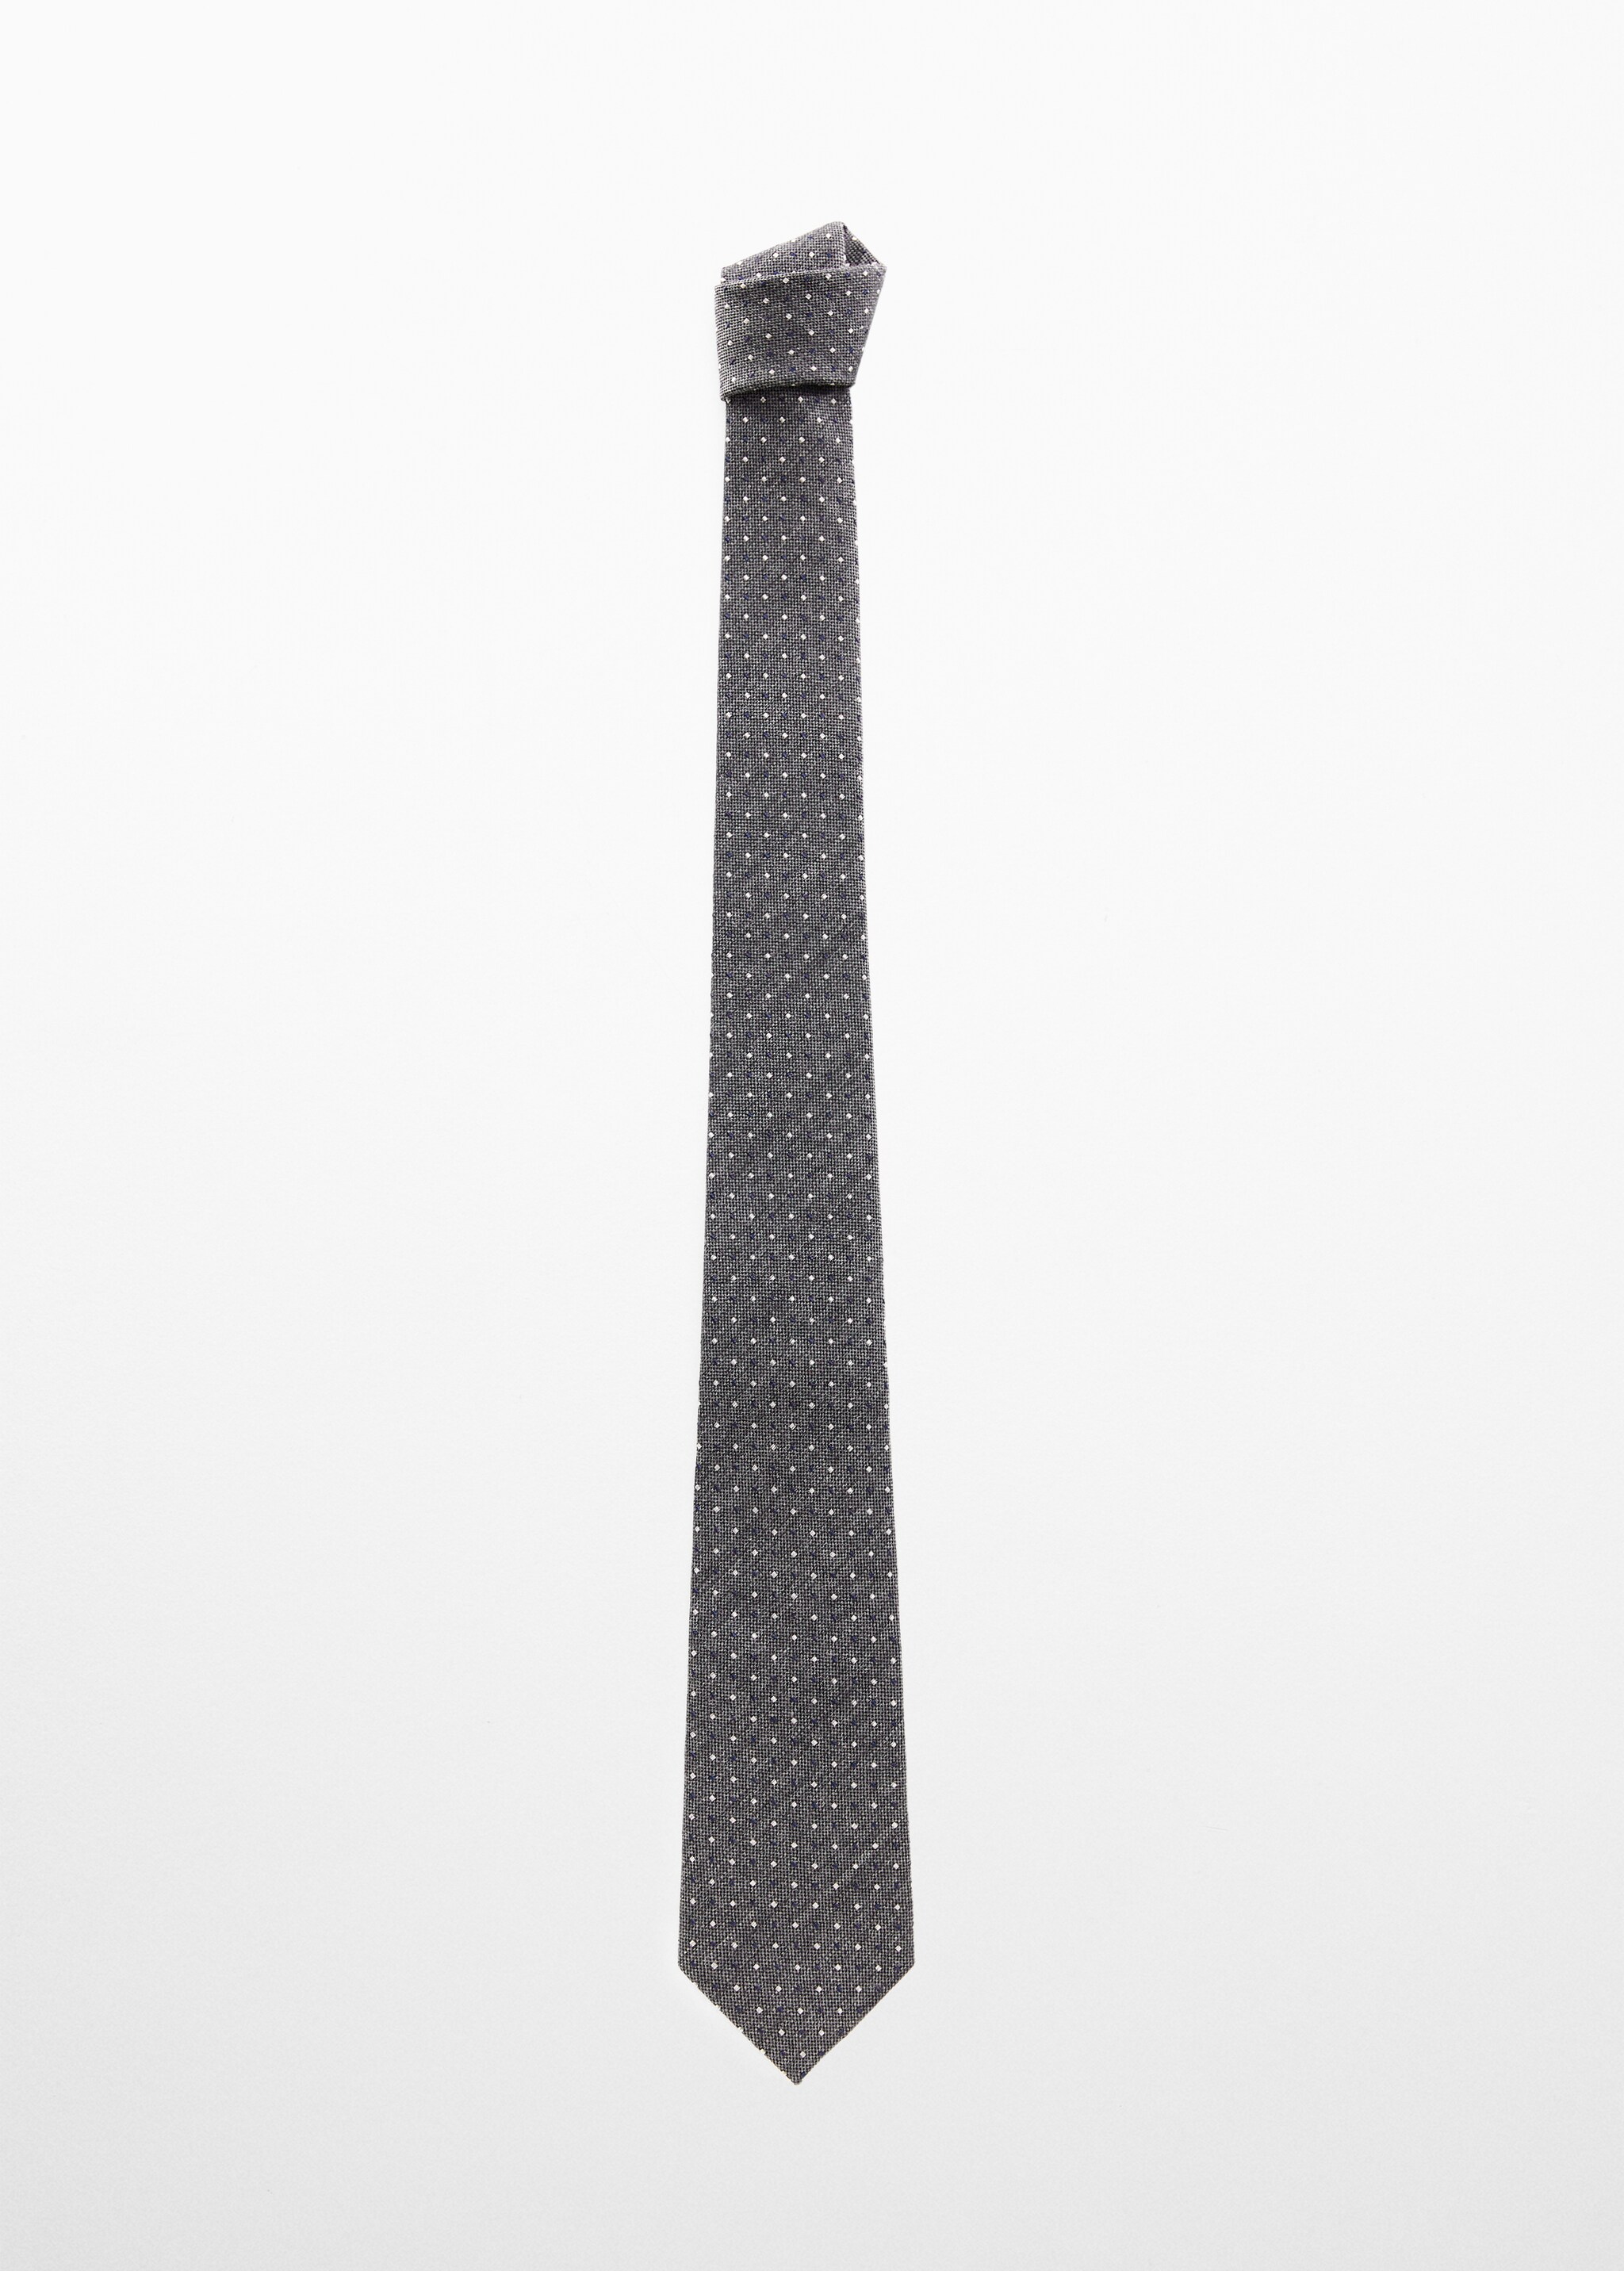 Silk wool knit tie - Article without model